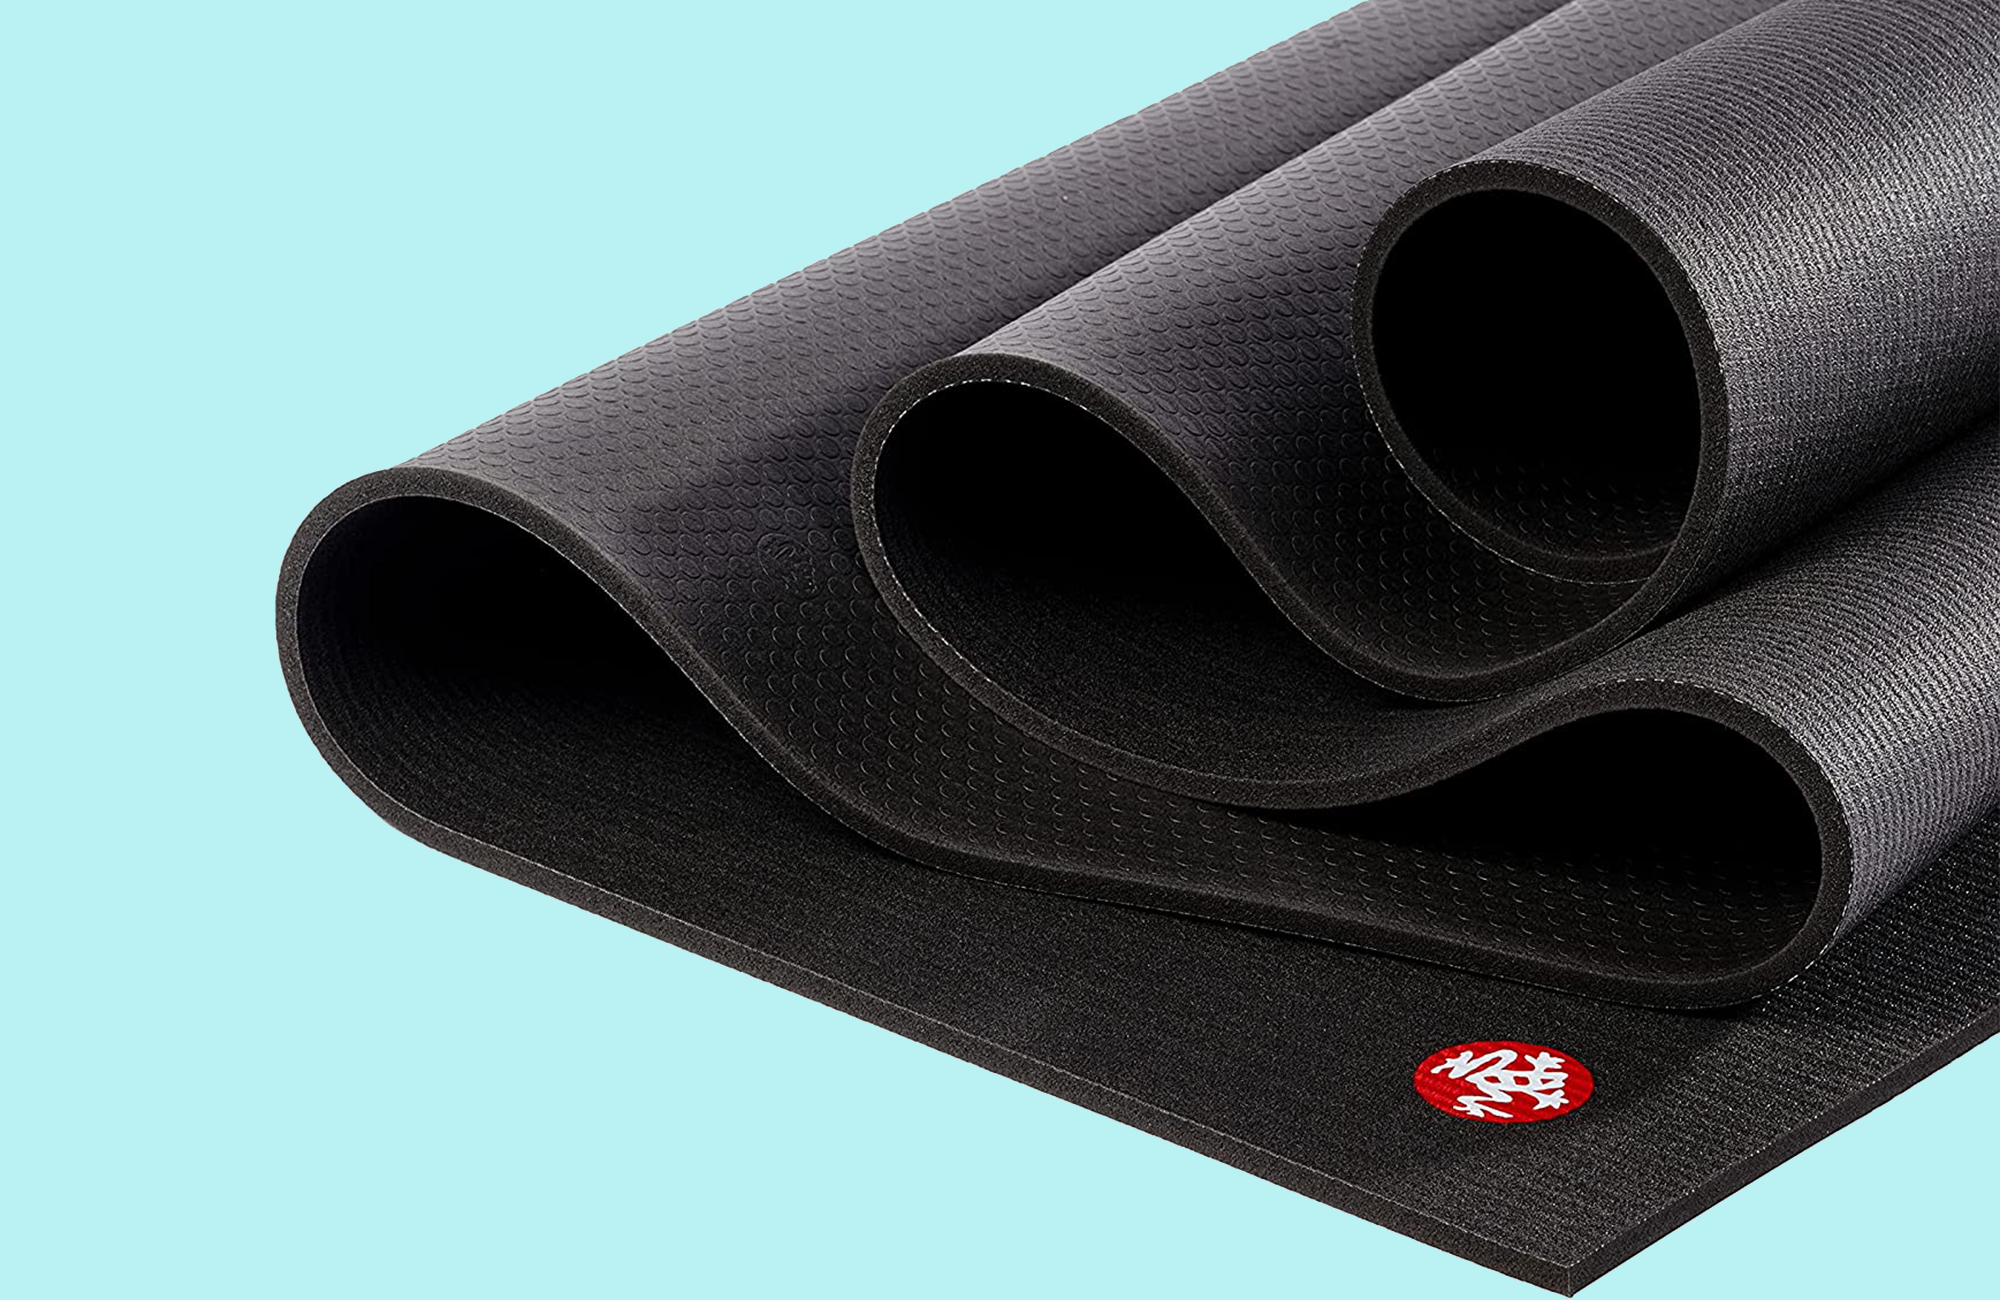 The best yoga mats of 2023